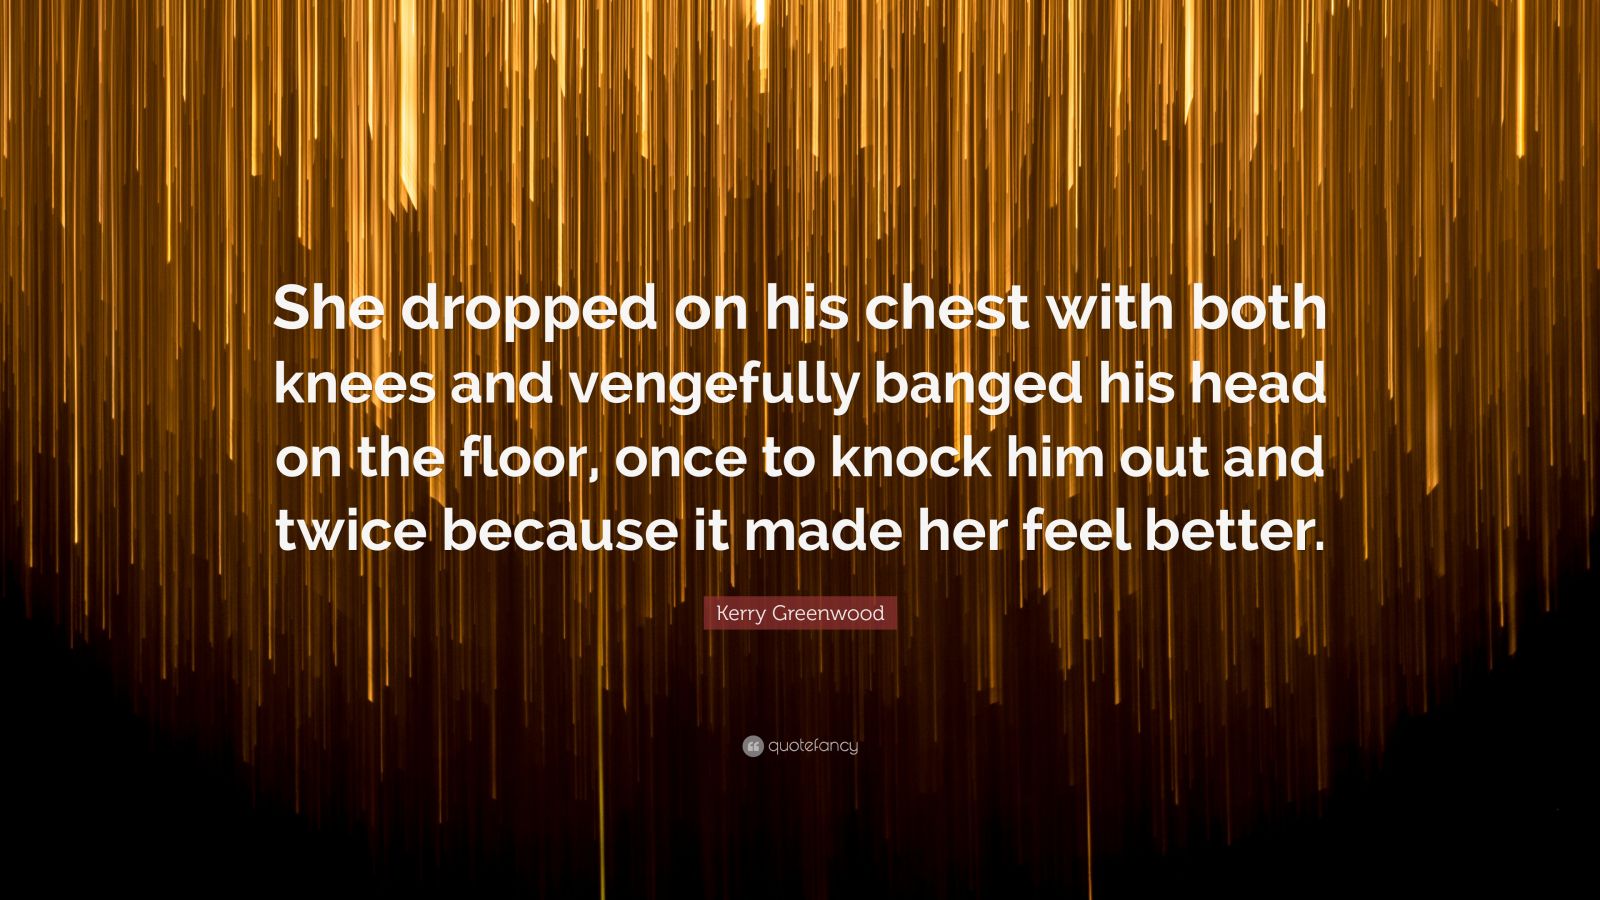 Kerry Greenwood Quote: “She dropped on his chest with both knees and  vengefully banged his head on the floor, once to knock him out and twice  be”